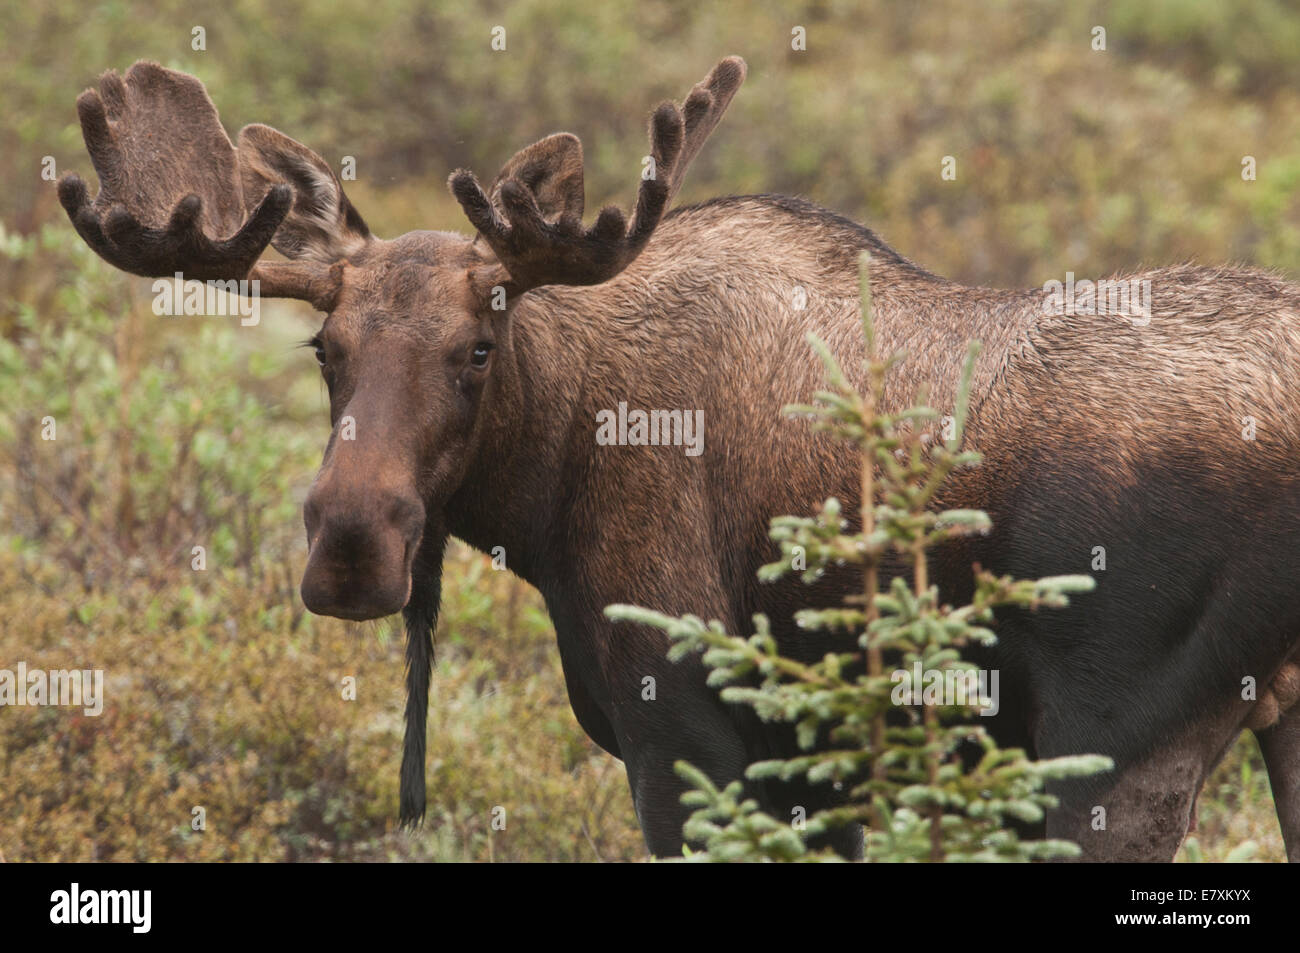 Young Bull Moose (Alces alces) with antlers in the velvet that promotes growth through the summer to be shed prior to the Fall r Stock Photo